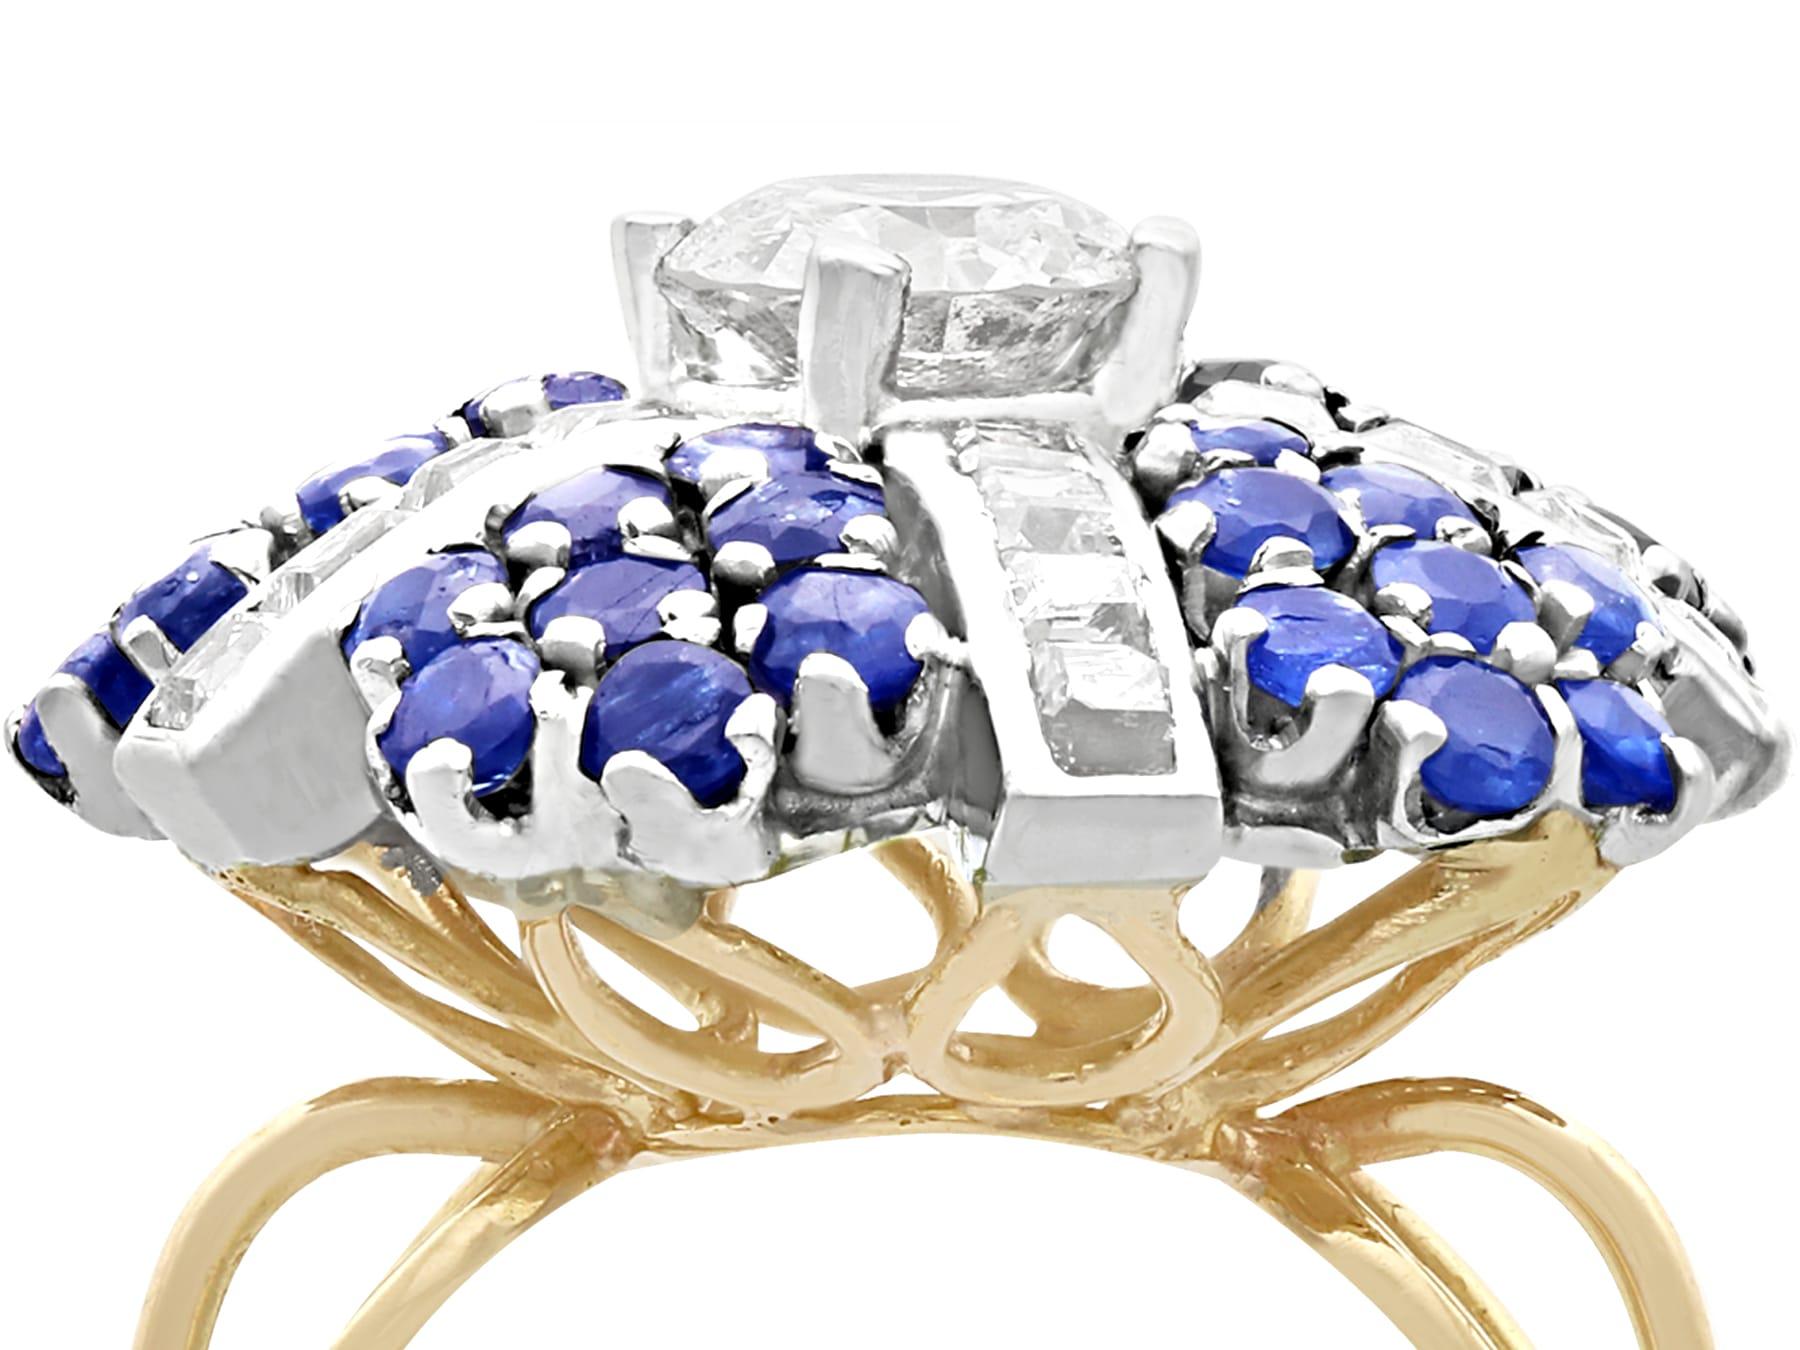 An impressive vintage 1.63 carat sapphire and 1.67 carat diamond, 14 karat yellow and white gold cluster ring; part of our diverse vintage jewelry collections.

This fine and impressive vintage sapphire and diamond cocktail ring has been crafted in